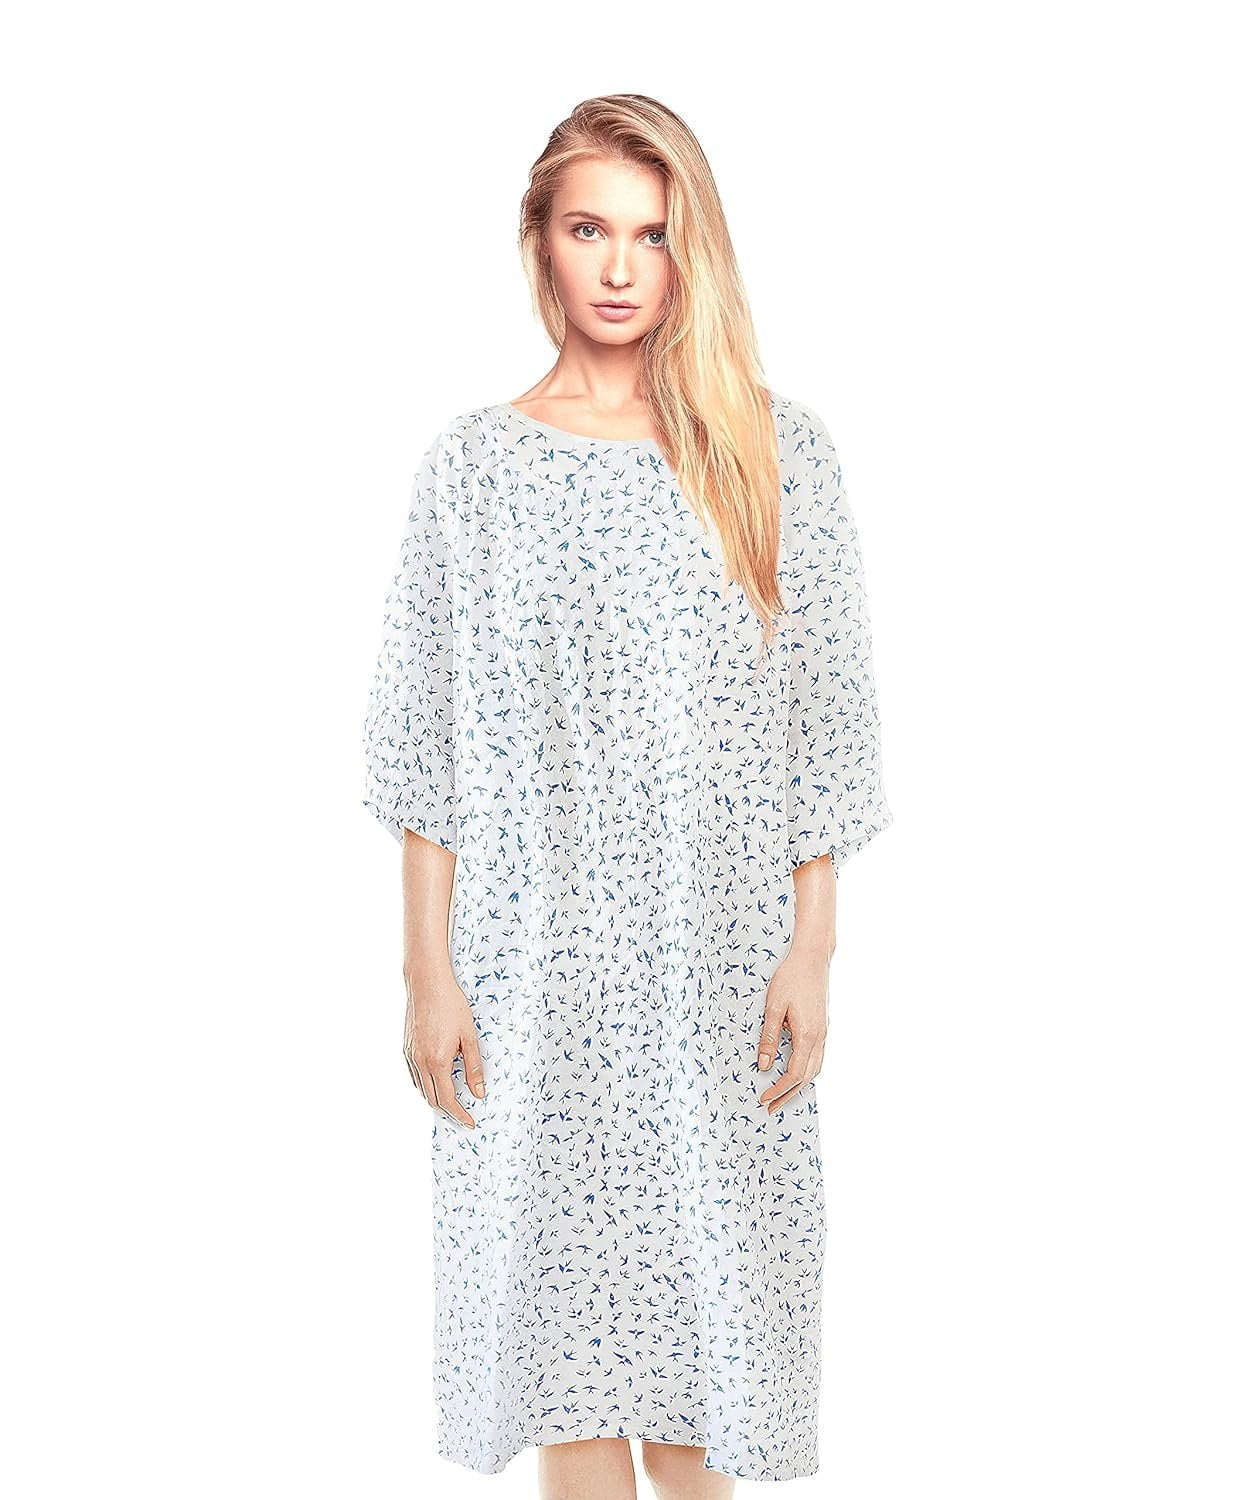 Hospital Gowns Women Open Back Large Pack 3 White Patient Tie Half Sleeves Reusable Cotton Gown Knee Length Unisex Medical Hospitals df82cbfa c752 4b7c aaae 64f37f9bd53c.6e65a28d156b39b1d82f25ebb8fc4105